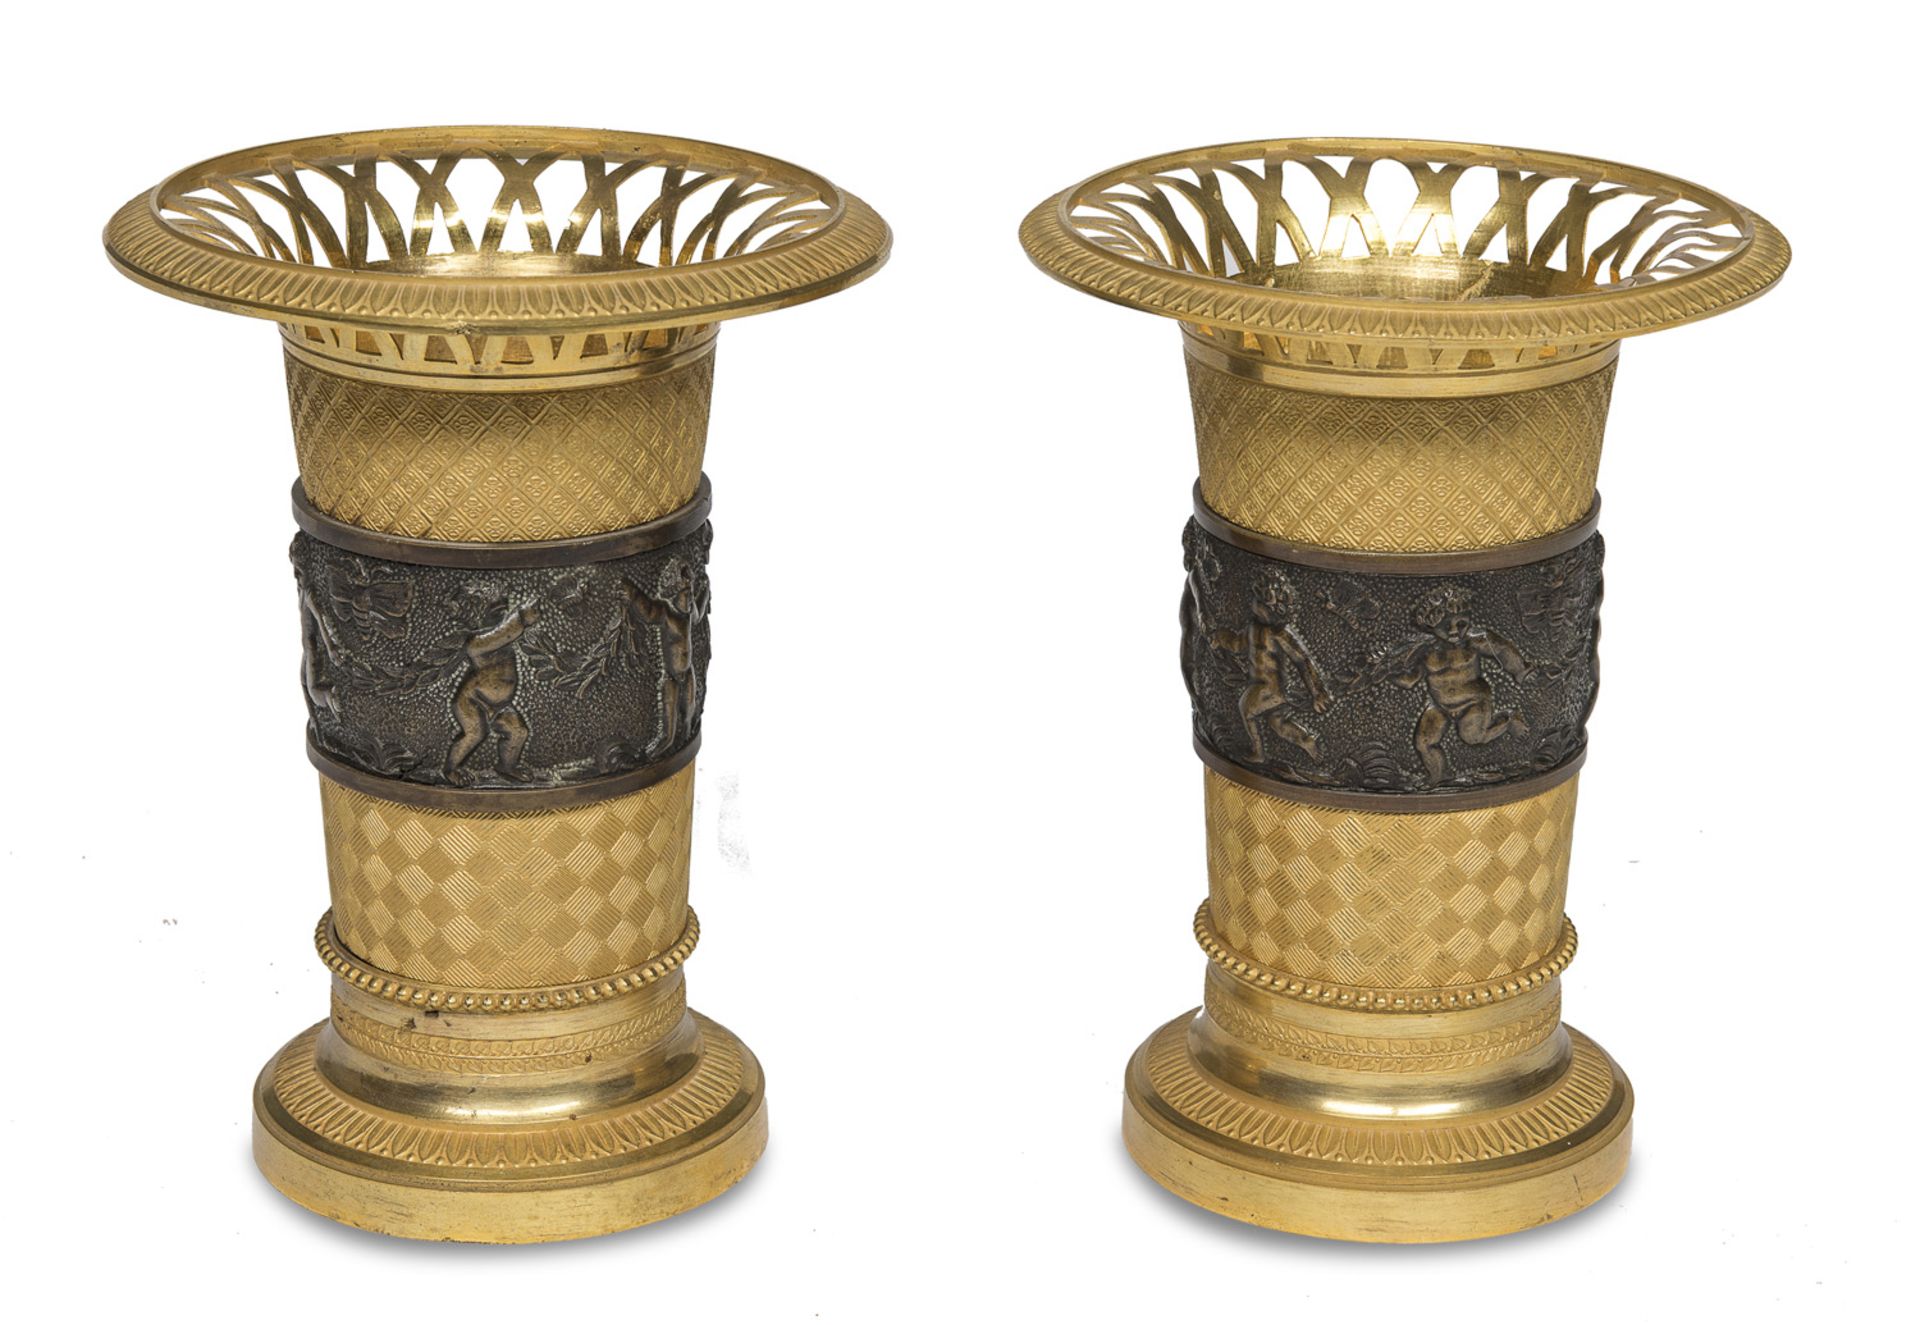 PAIR OF BRONZE VASES EARLY 19th CENTURY